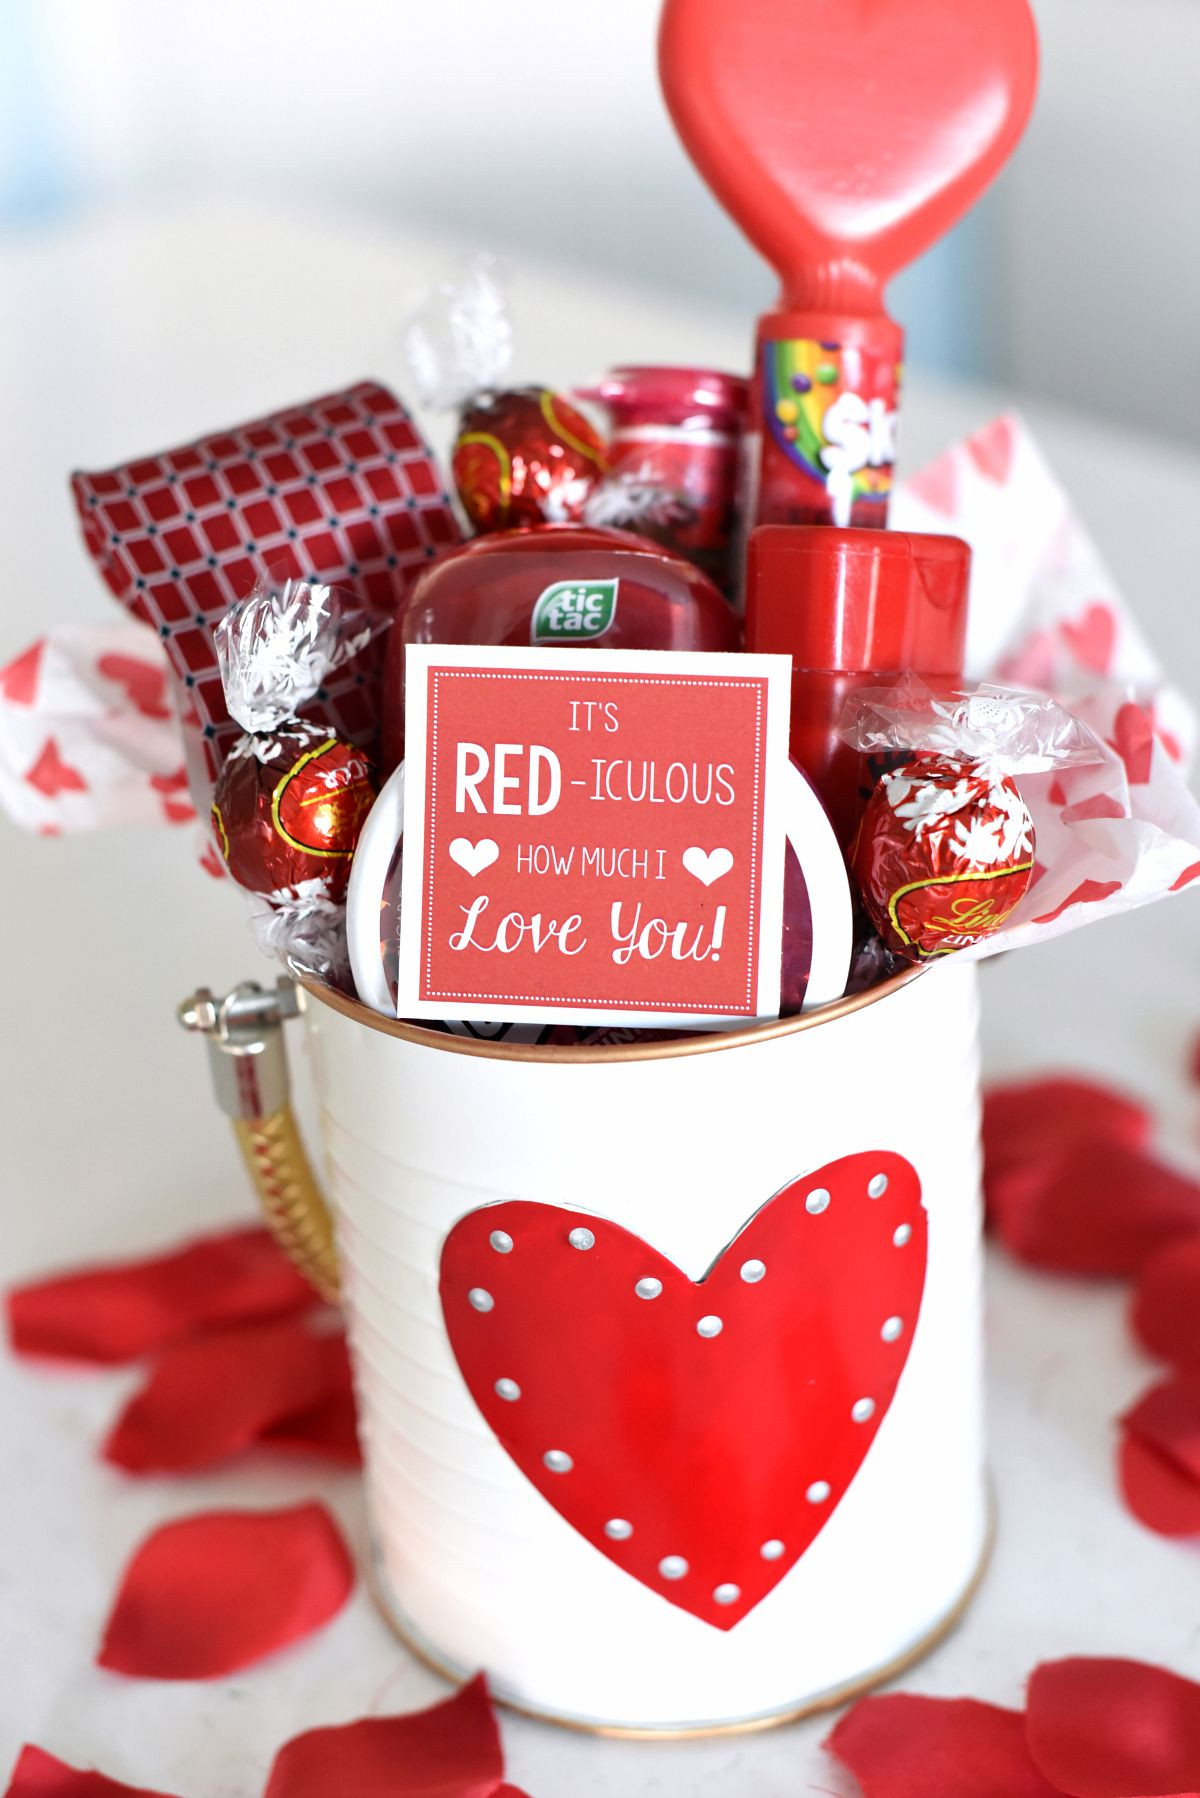 Cute Gifts For Boyfriend For Valentines Day
 Cute Valentine s Day Gift Idea RED iculous Basket